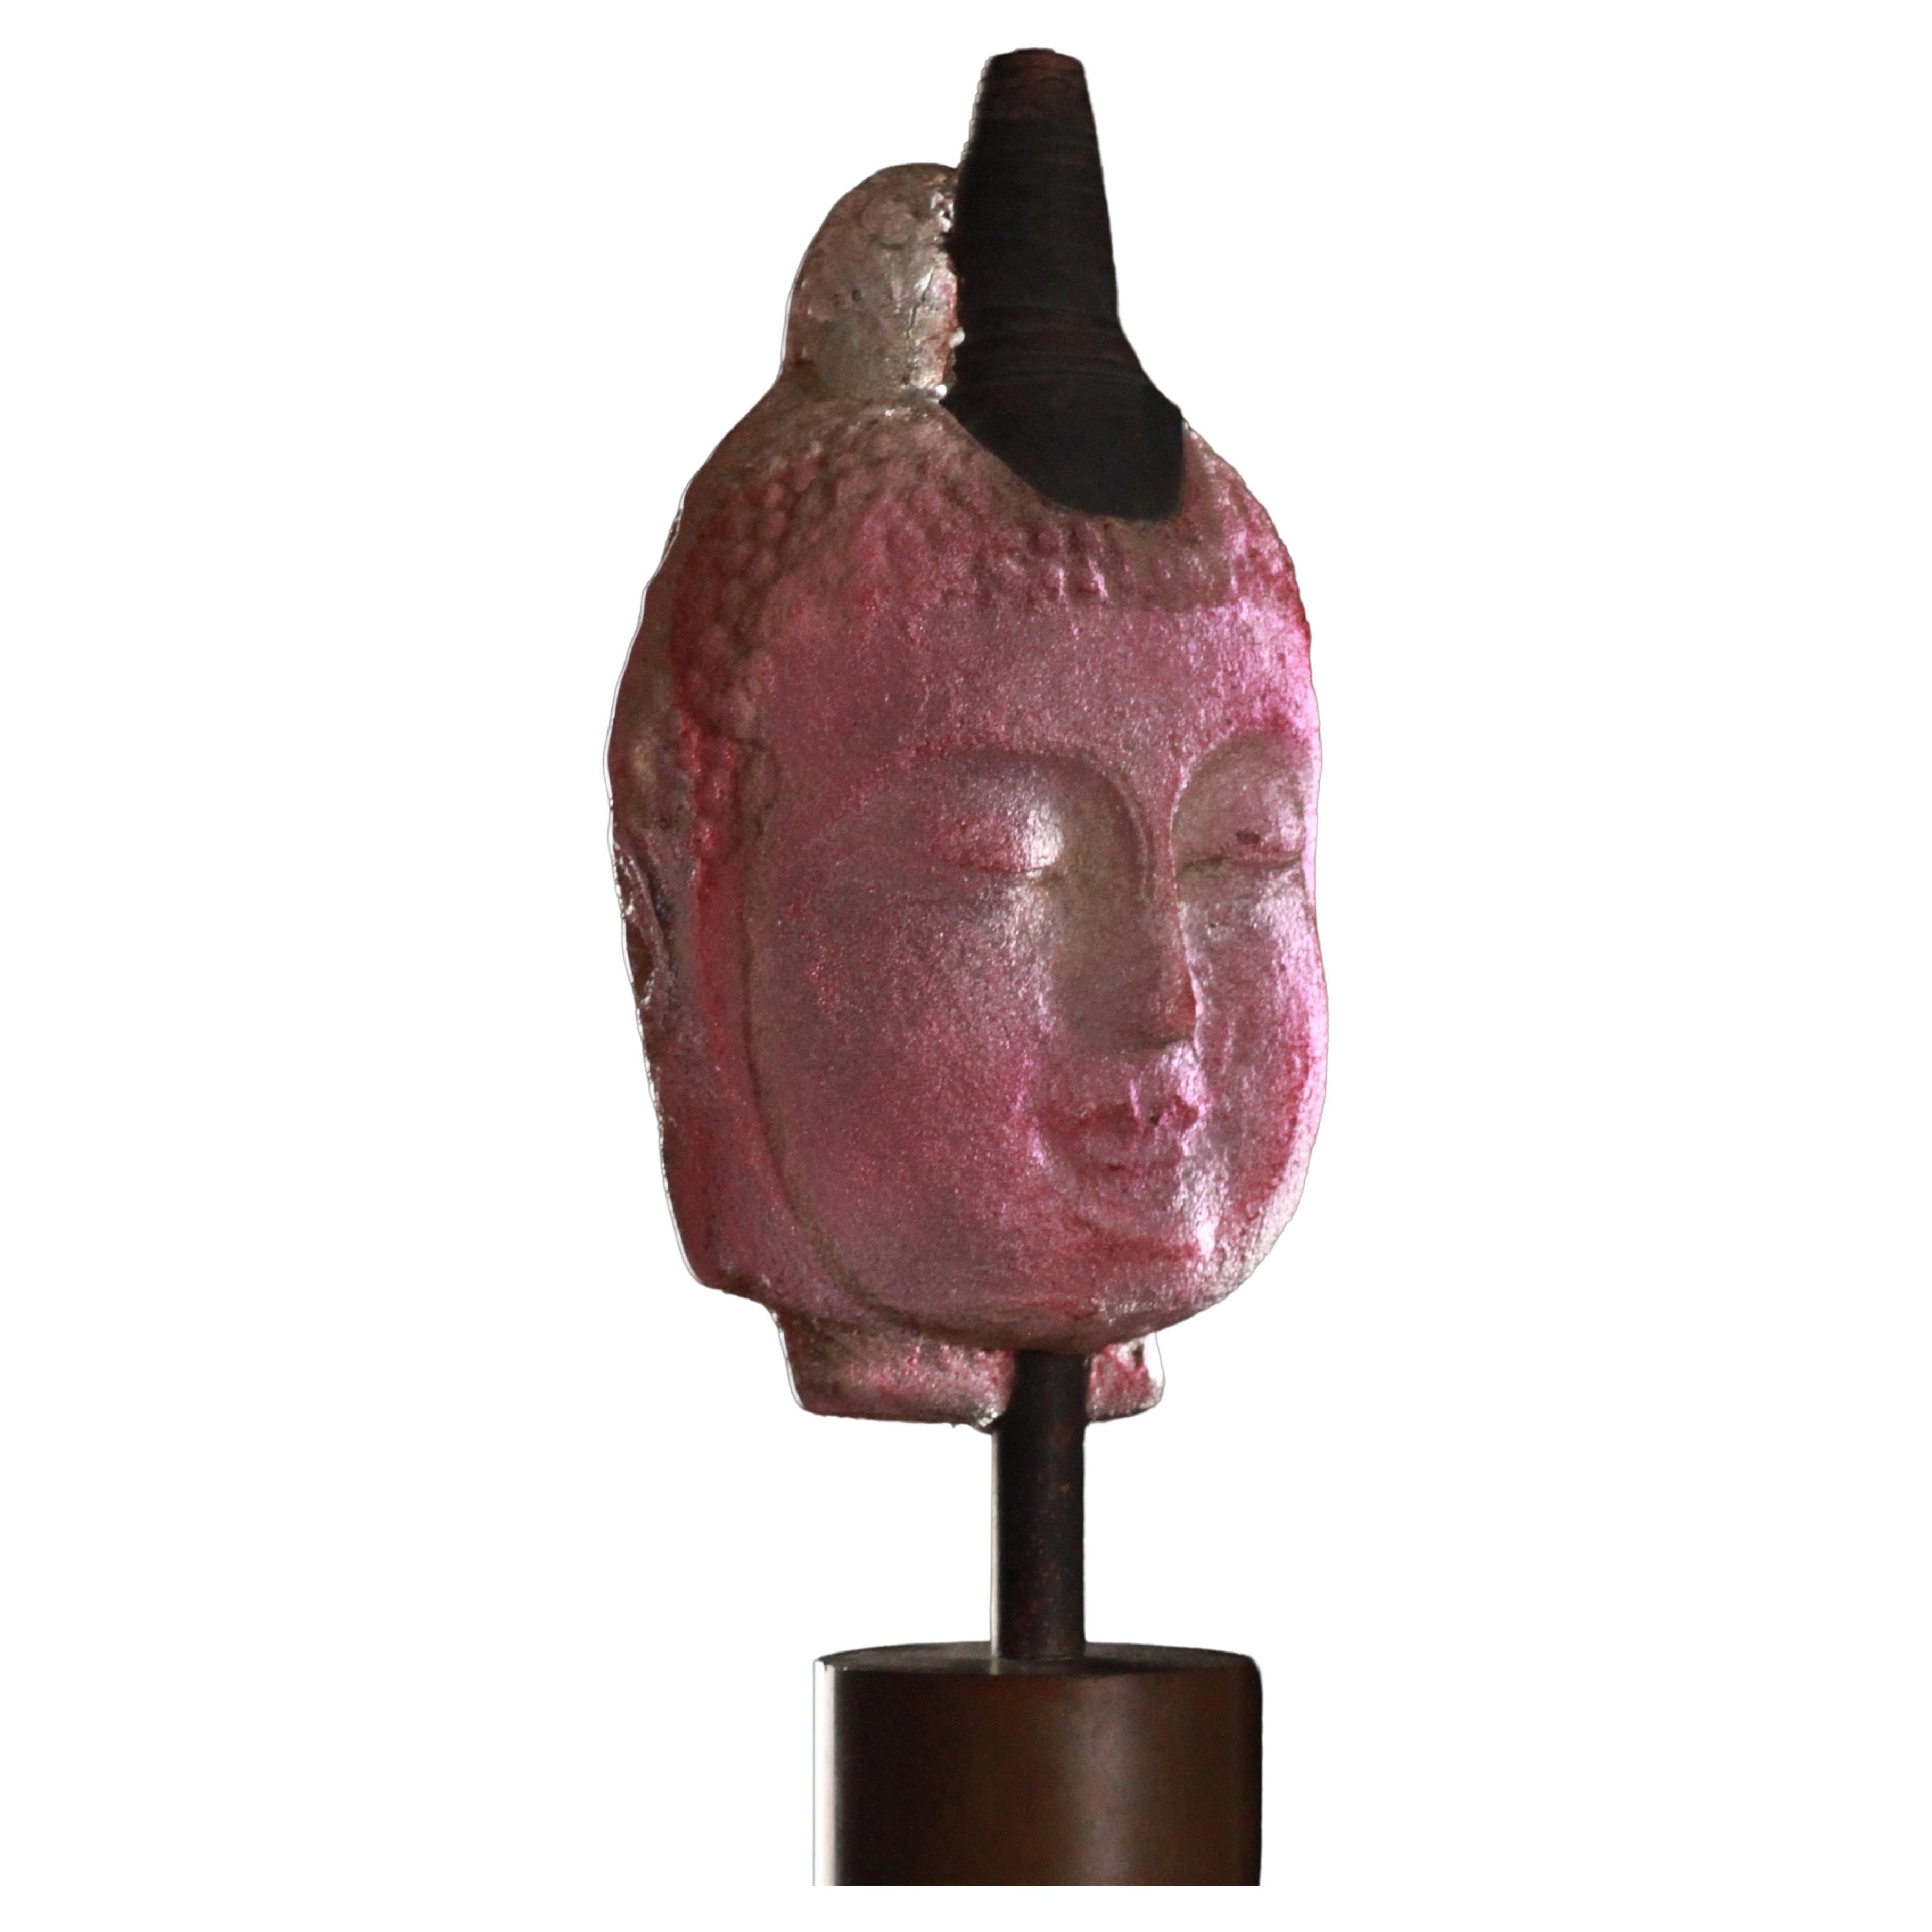 Marlene Rose (b. 1967) Head of Buddha, 2004 Sand Cast Glass and Steel Sculpture For Sale